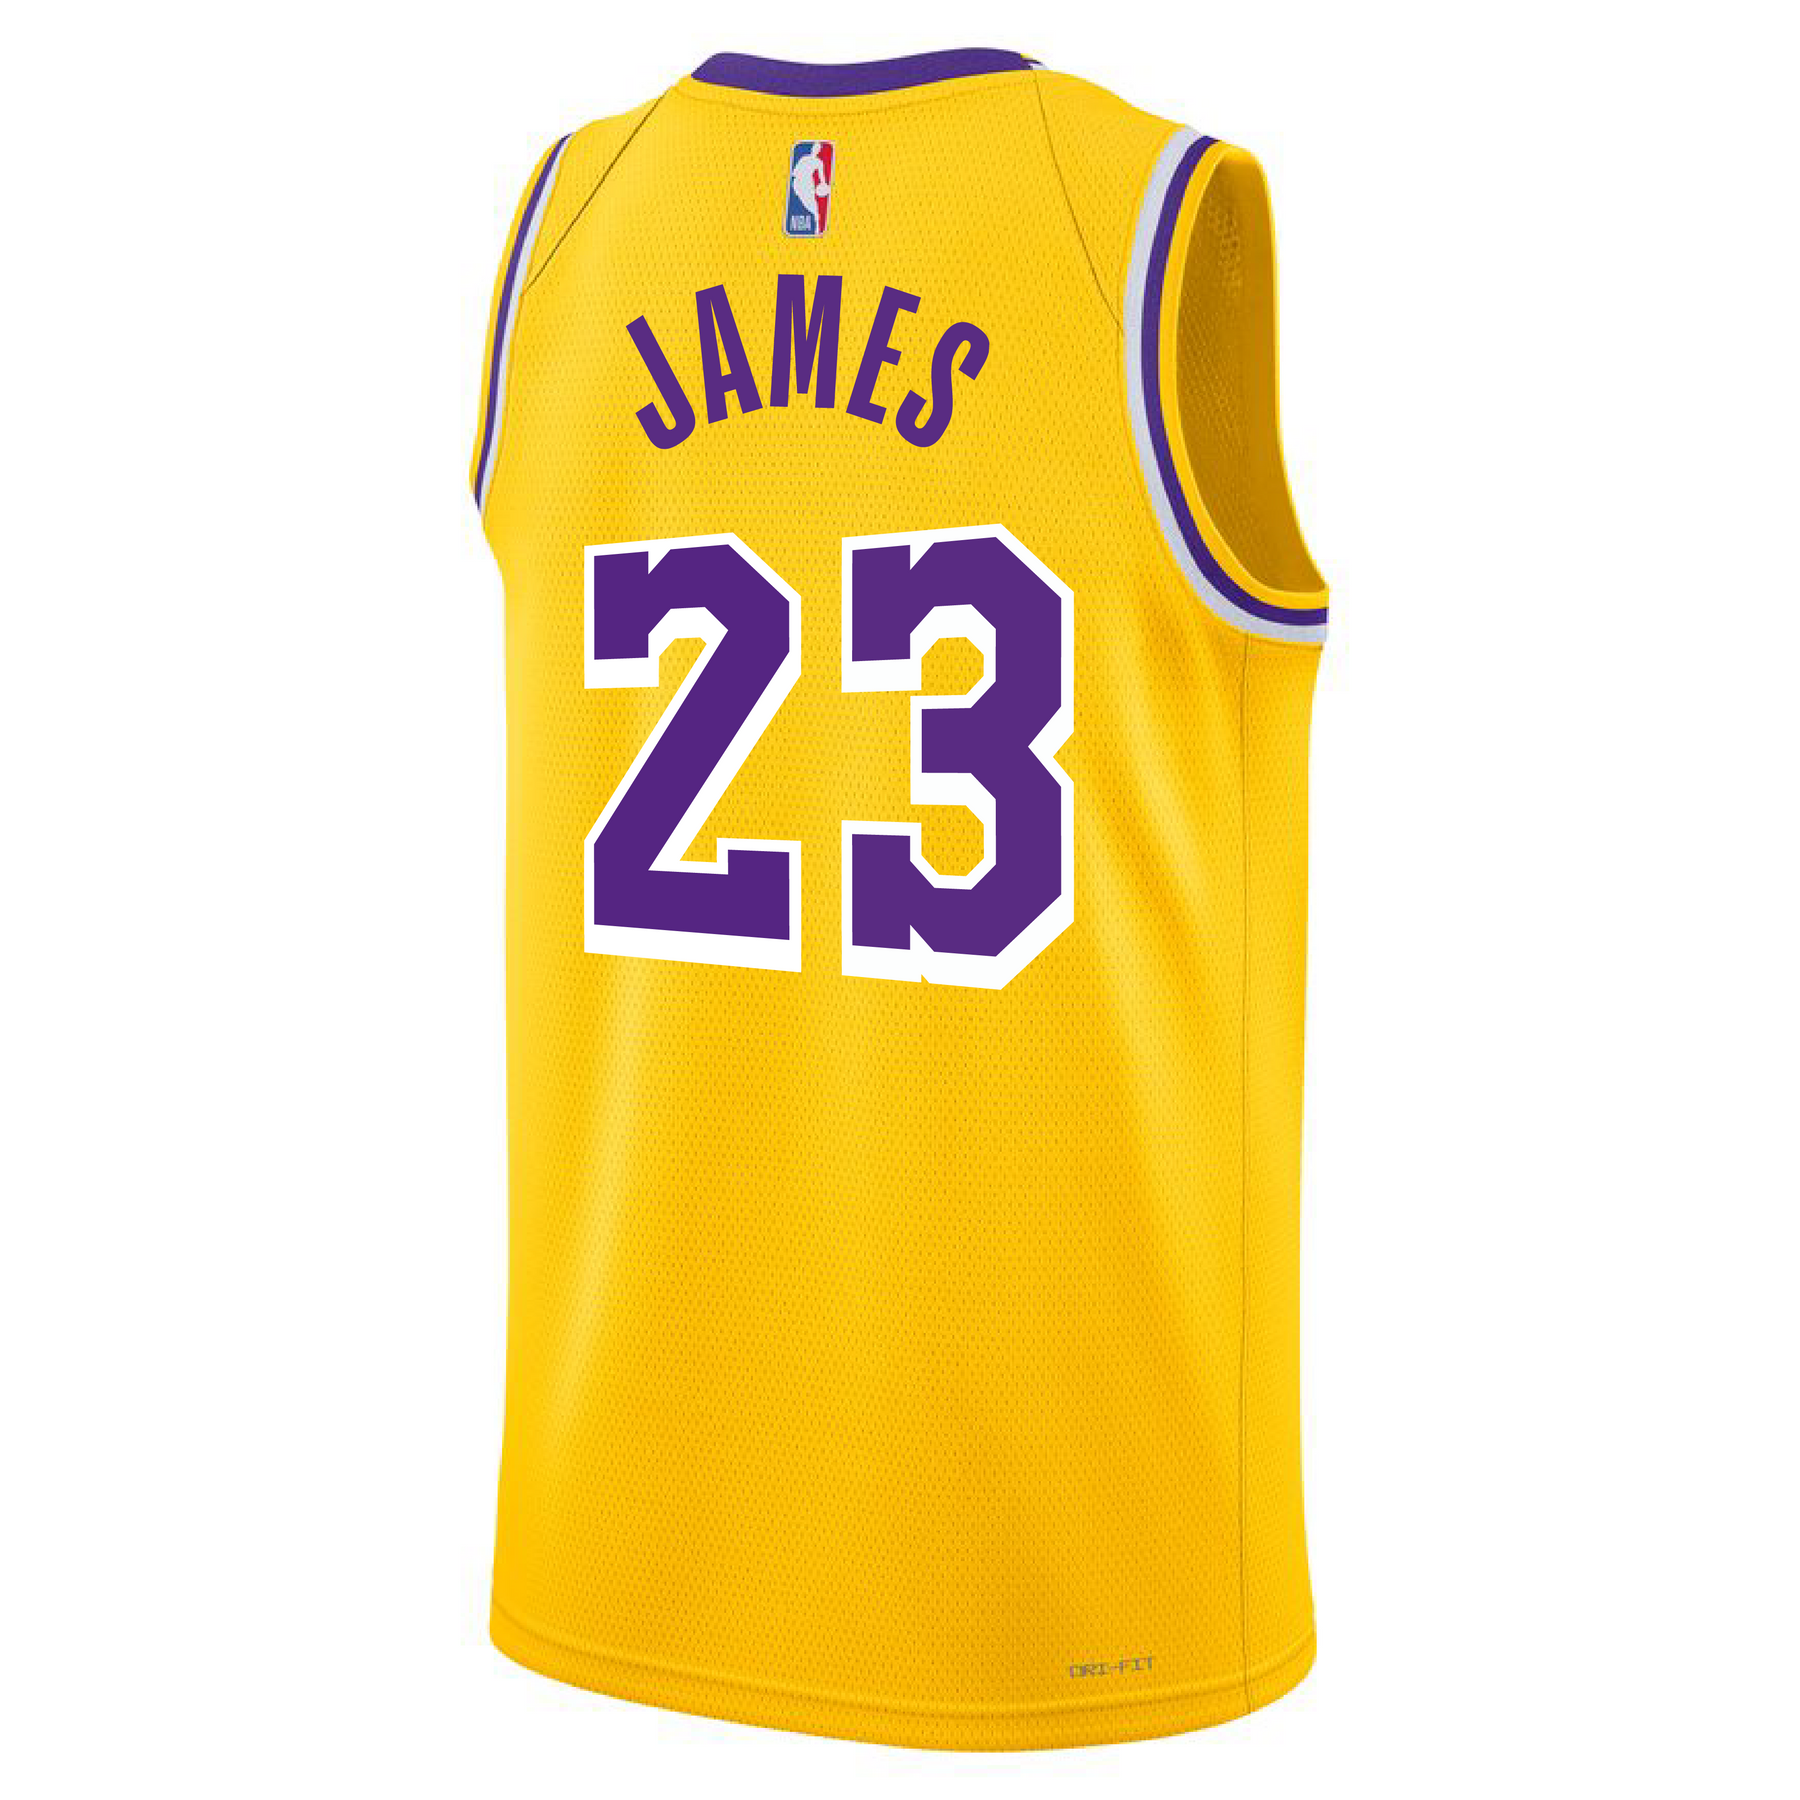 23 LeBron James Basketball Jersey Los Angeles Lakers Jersey